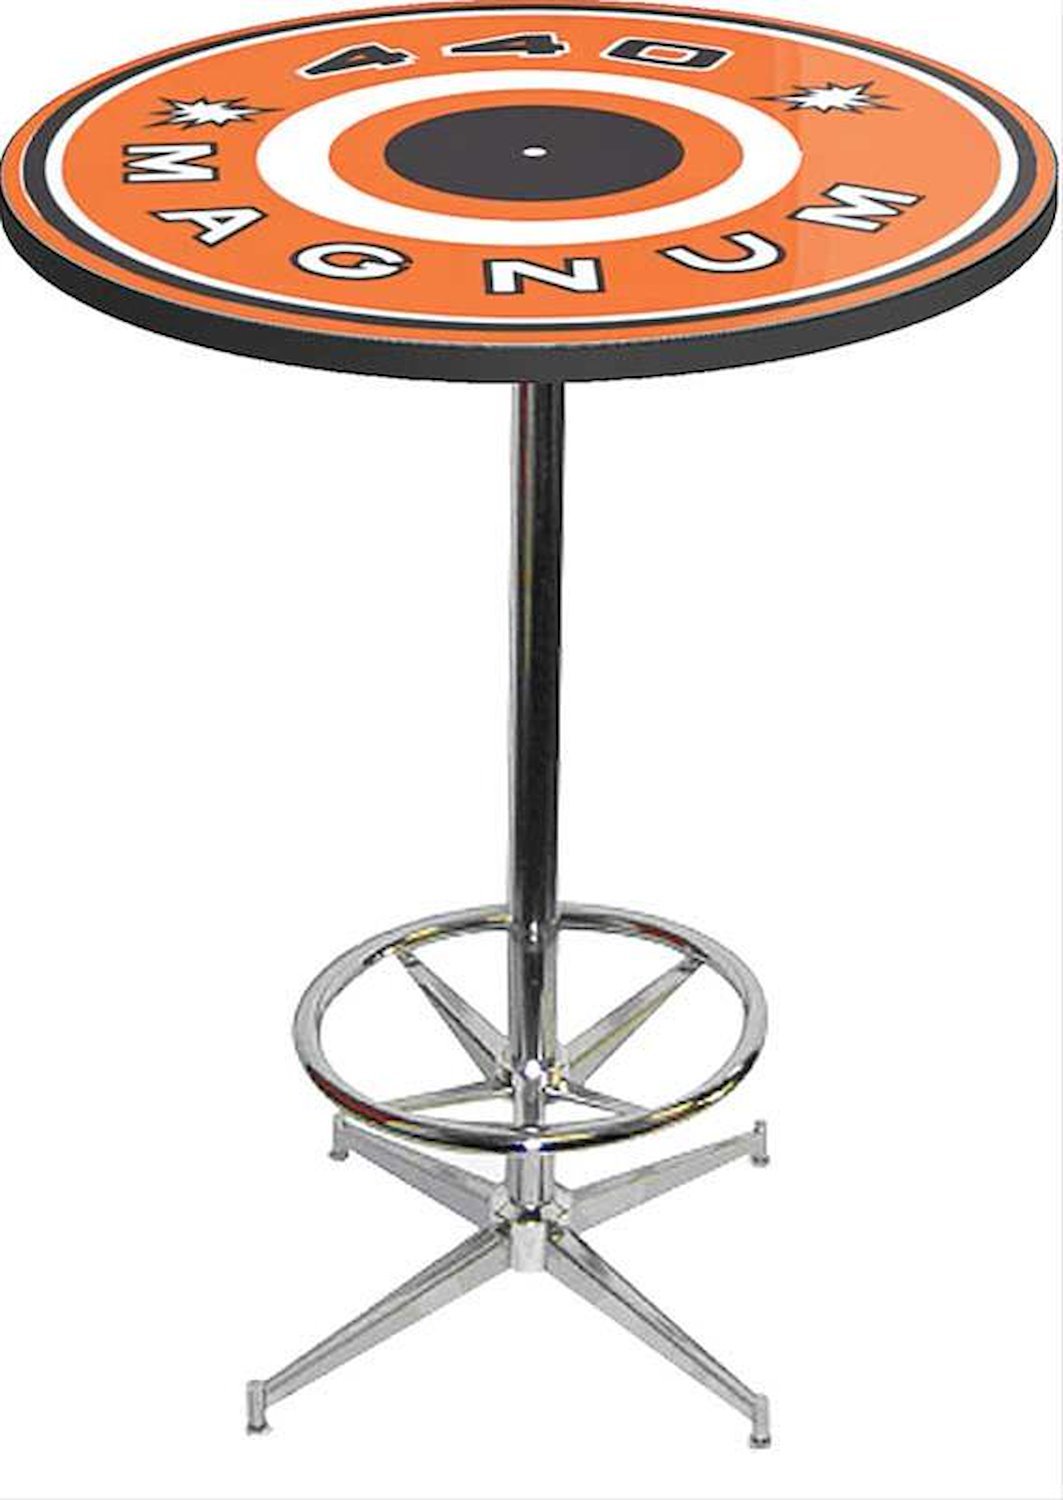 MD673111 Pub Table With Chrome Base And Foot Rest Mopar 440 Magnum Logo Pub Table With Chrome Base And Foot Rest